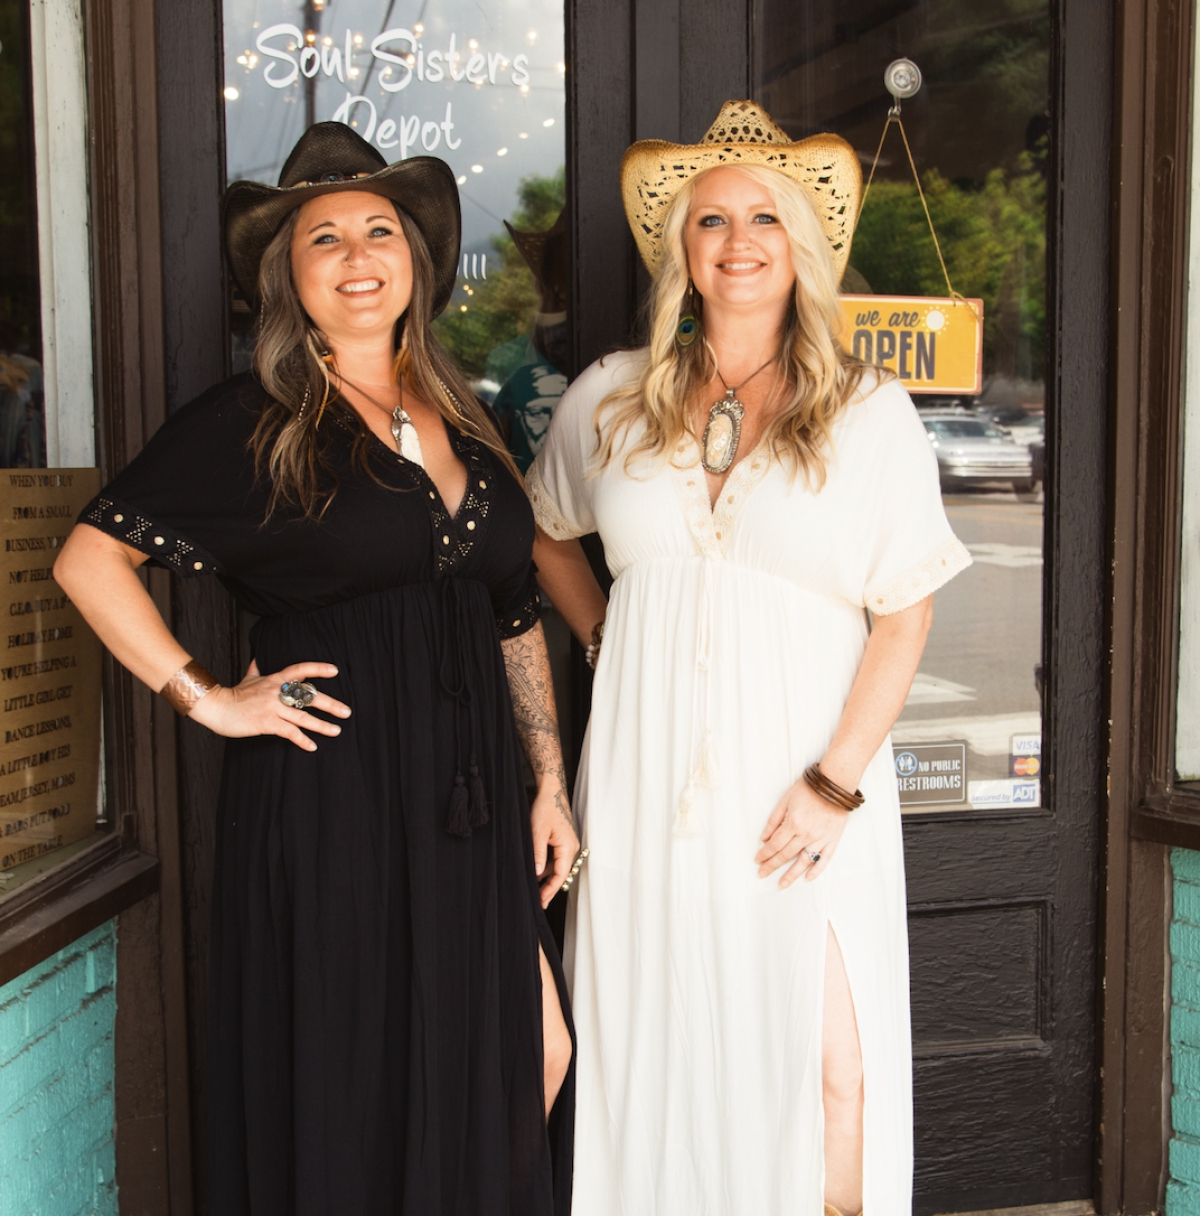 Q &amp; A with Soul Sisters Depot